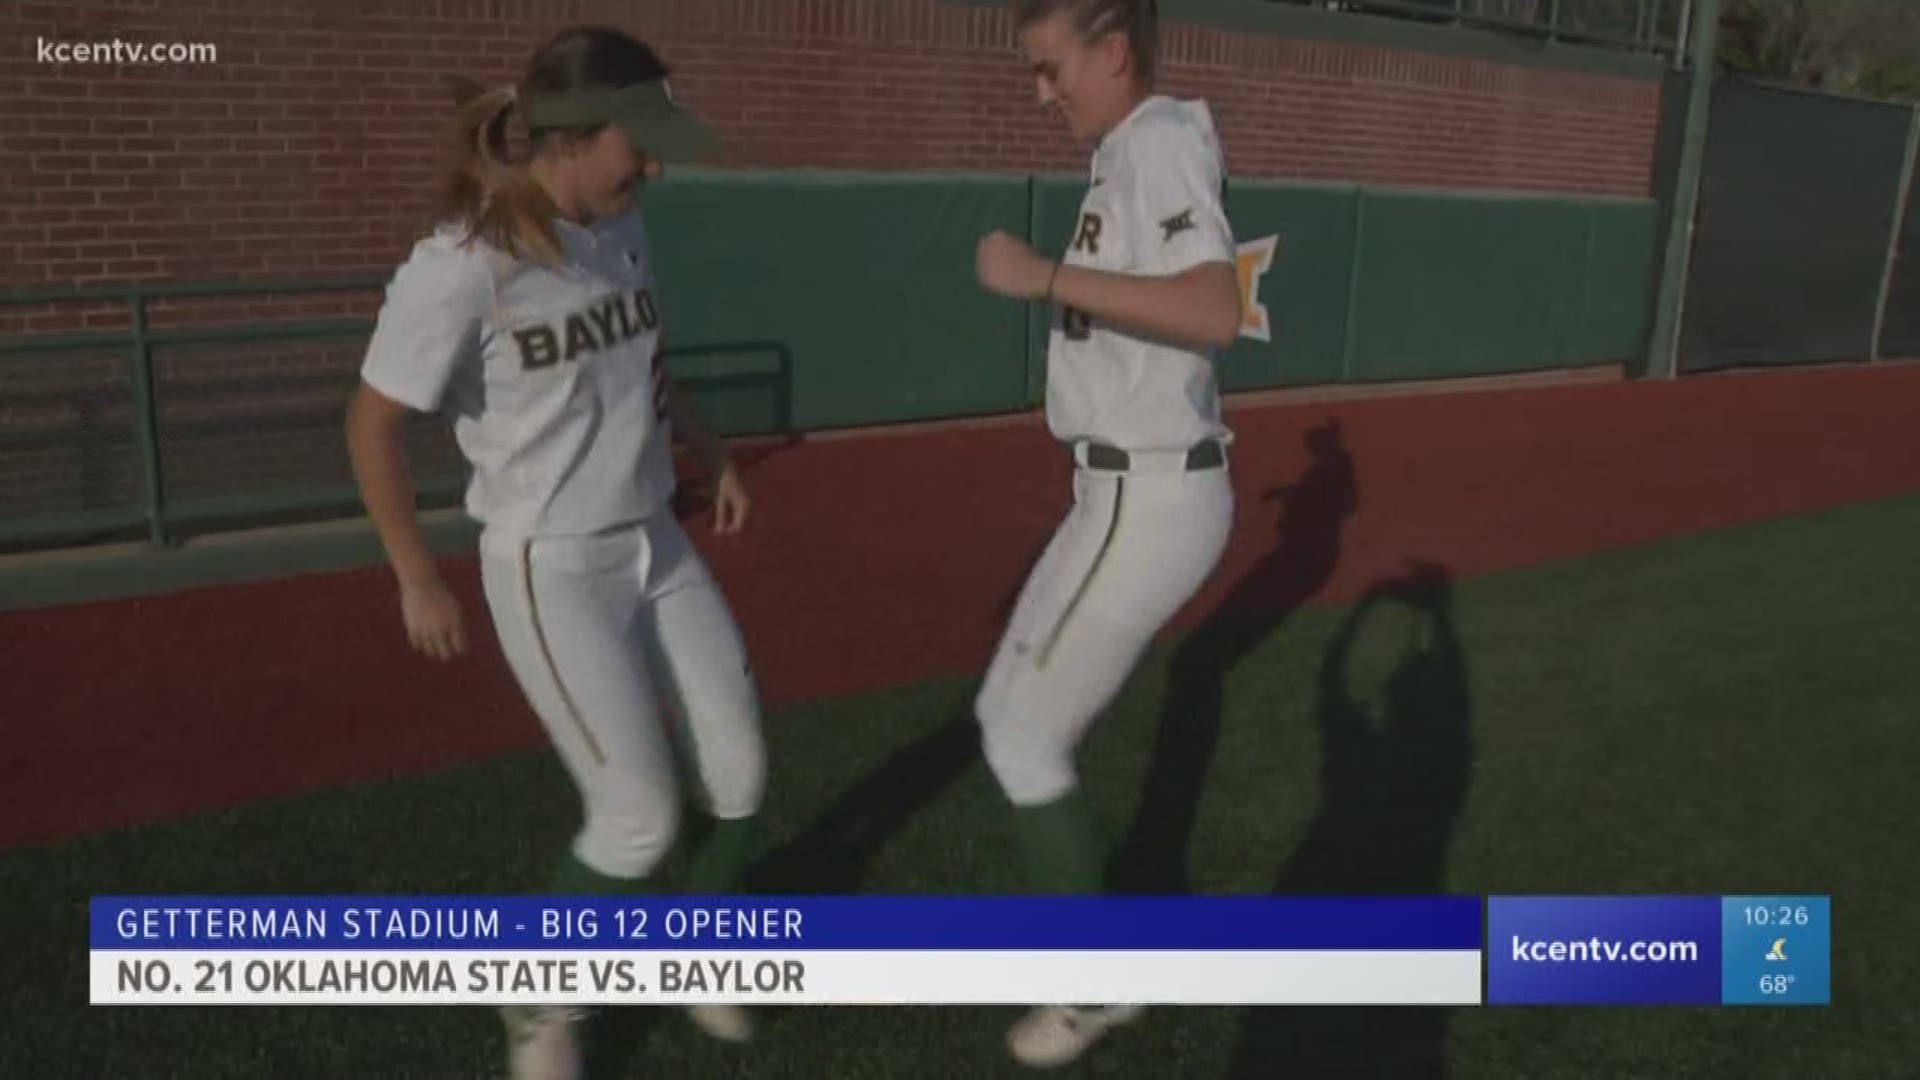 Oklahoma State demolished the Lady Bears 21-2, with the game ending in the fifth inning because of the run rule.